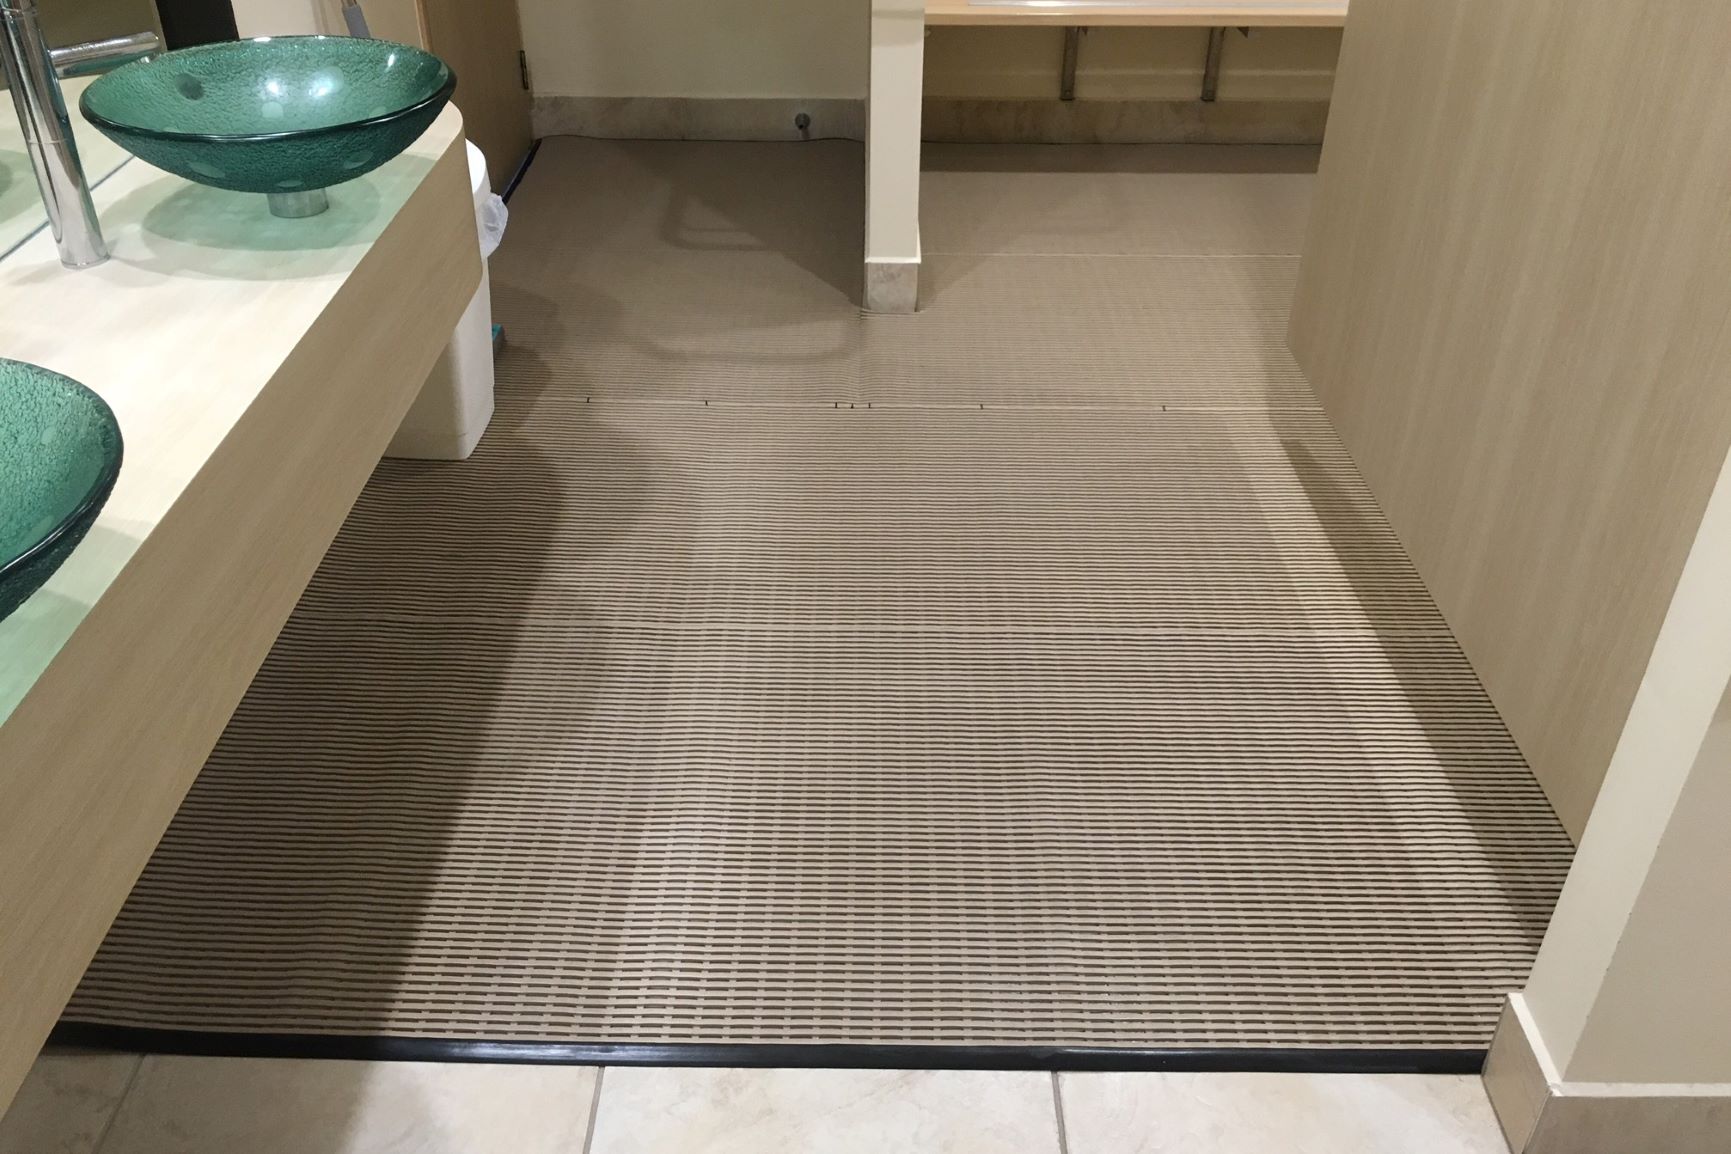 Rubber non slip matting lines the floor of a swimming pool changing room.